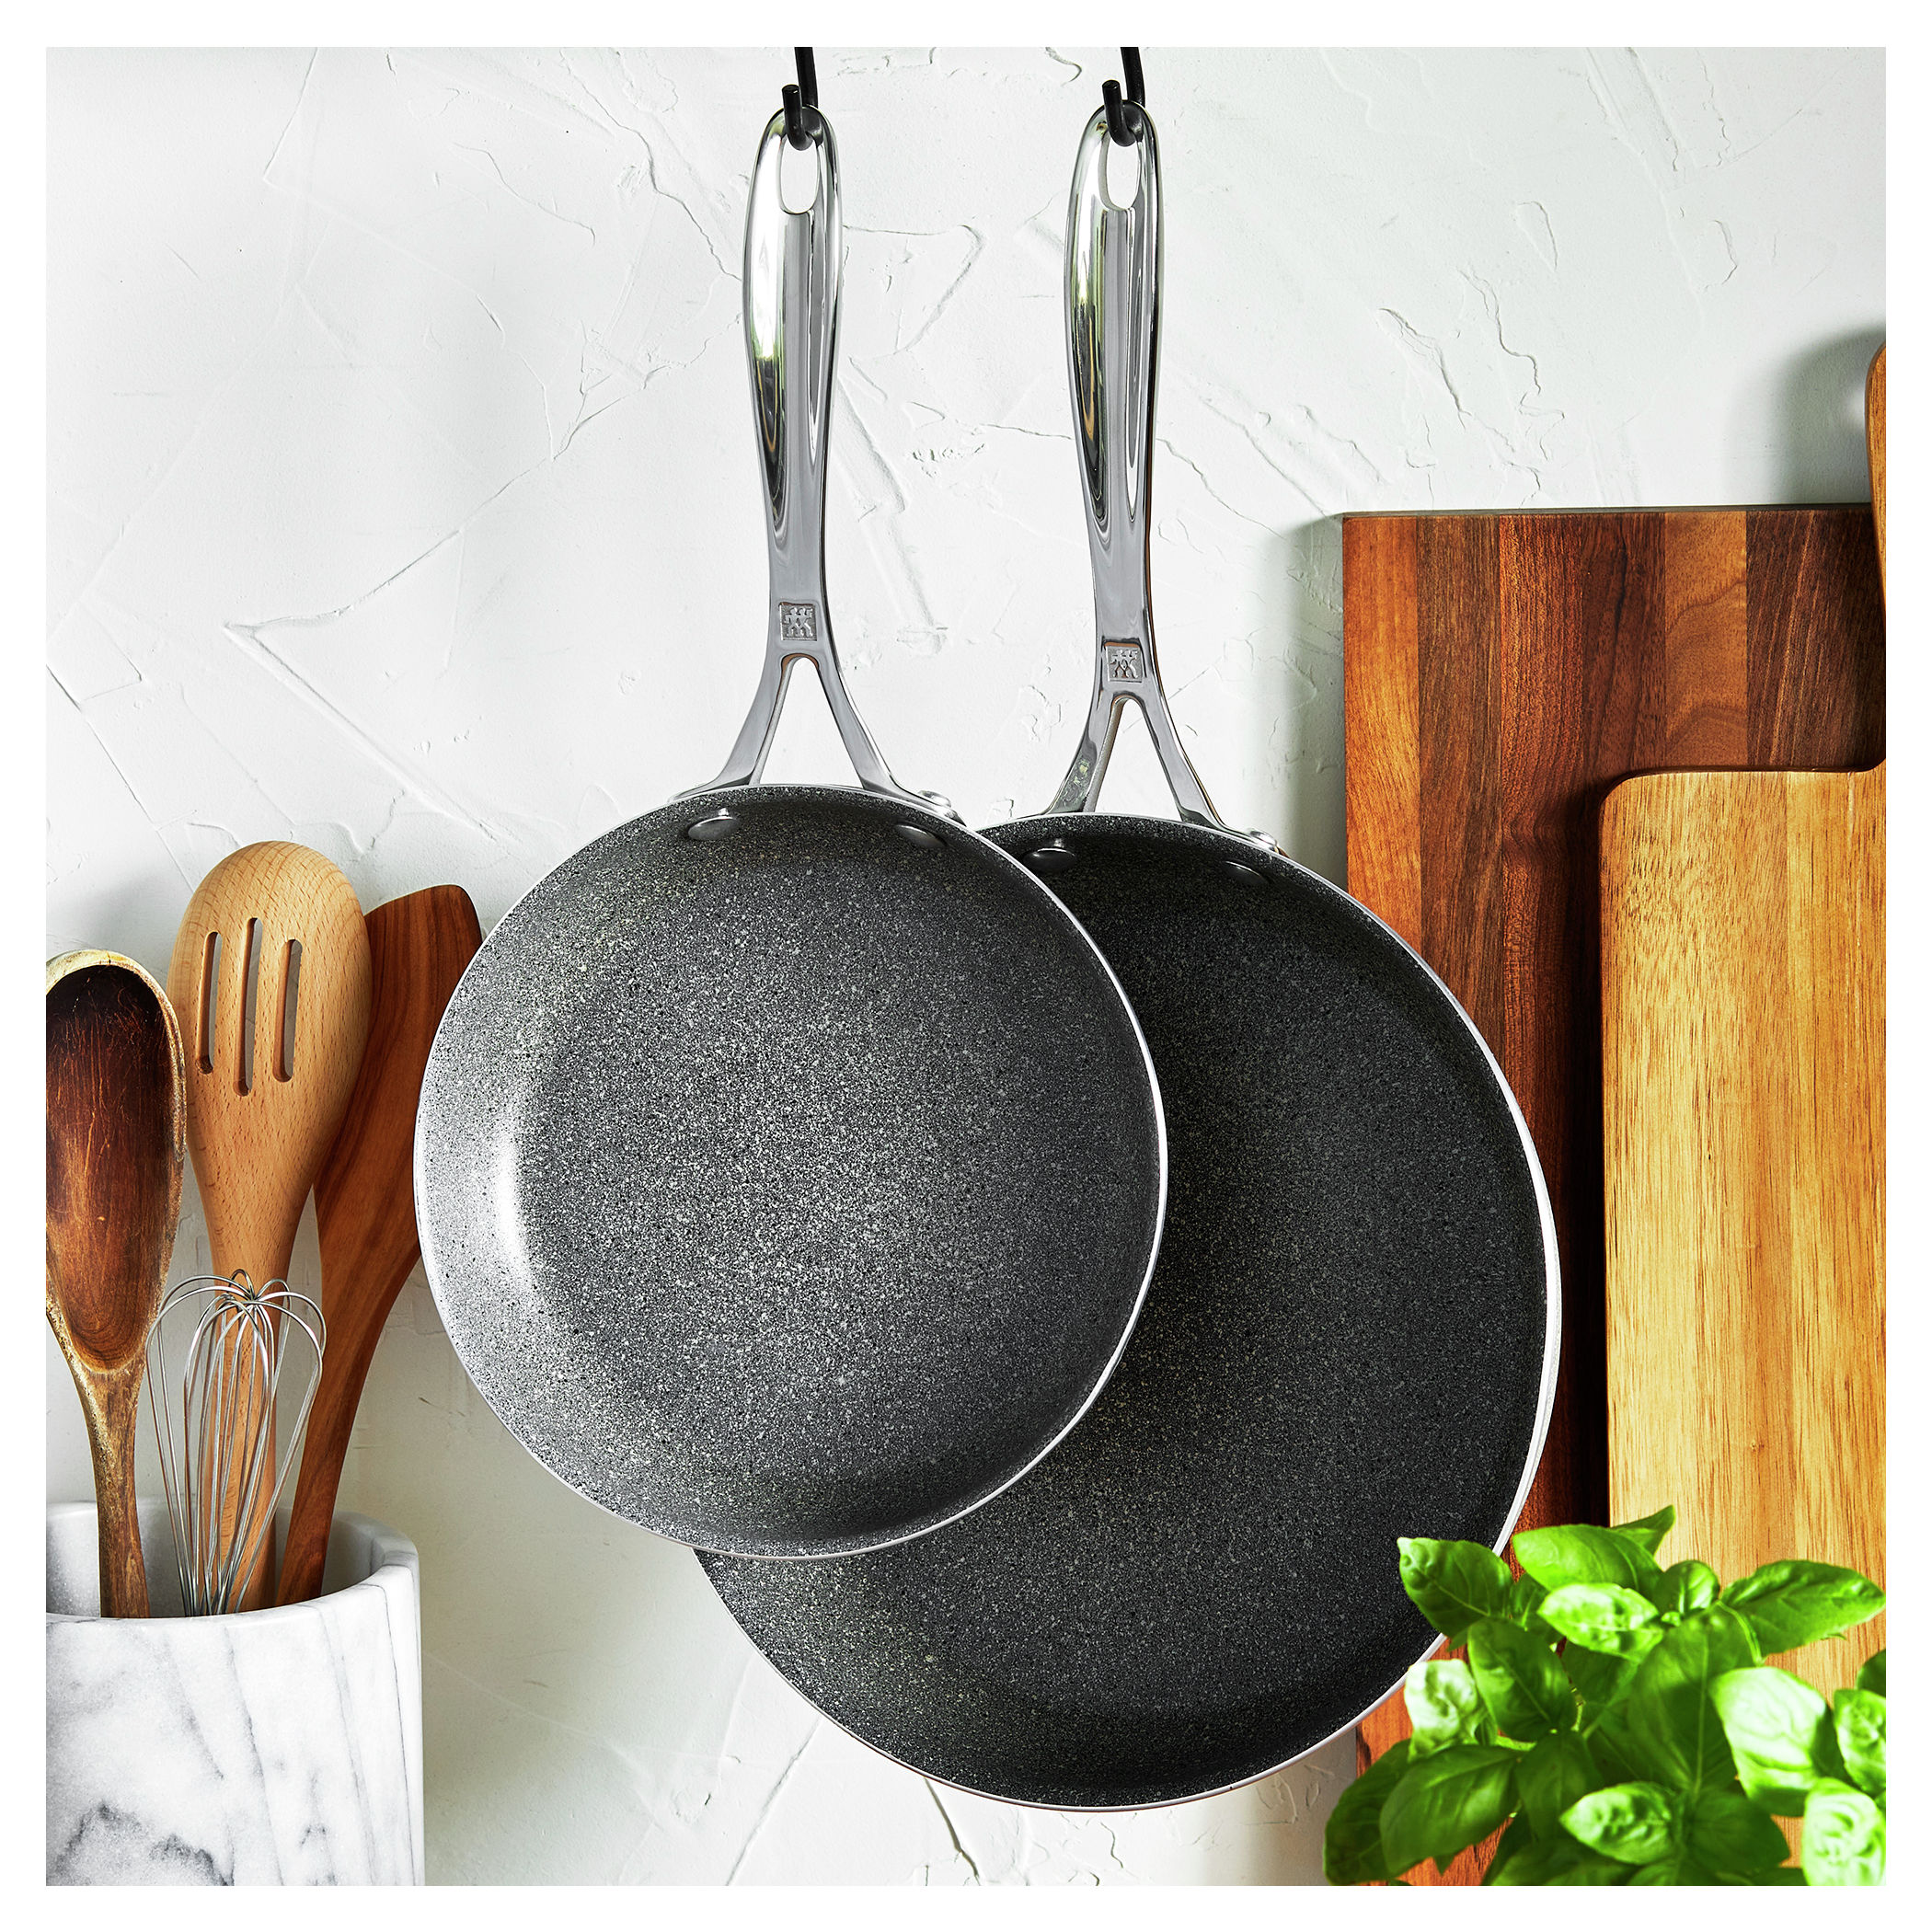 Buy the Set of 2 J.A. Henckels frying pans made in Italy great